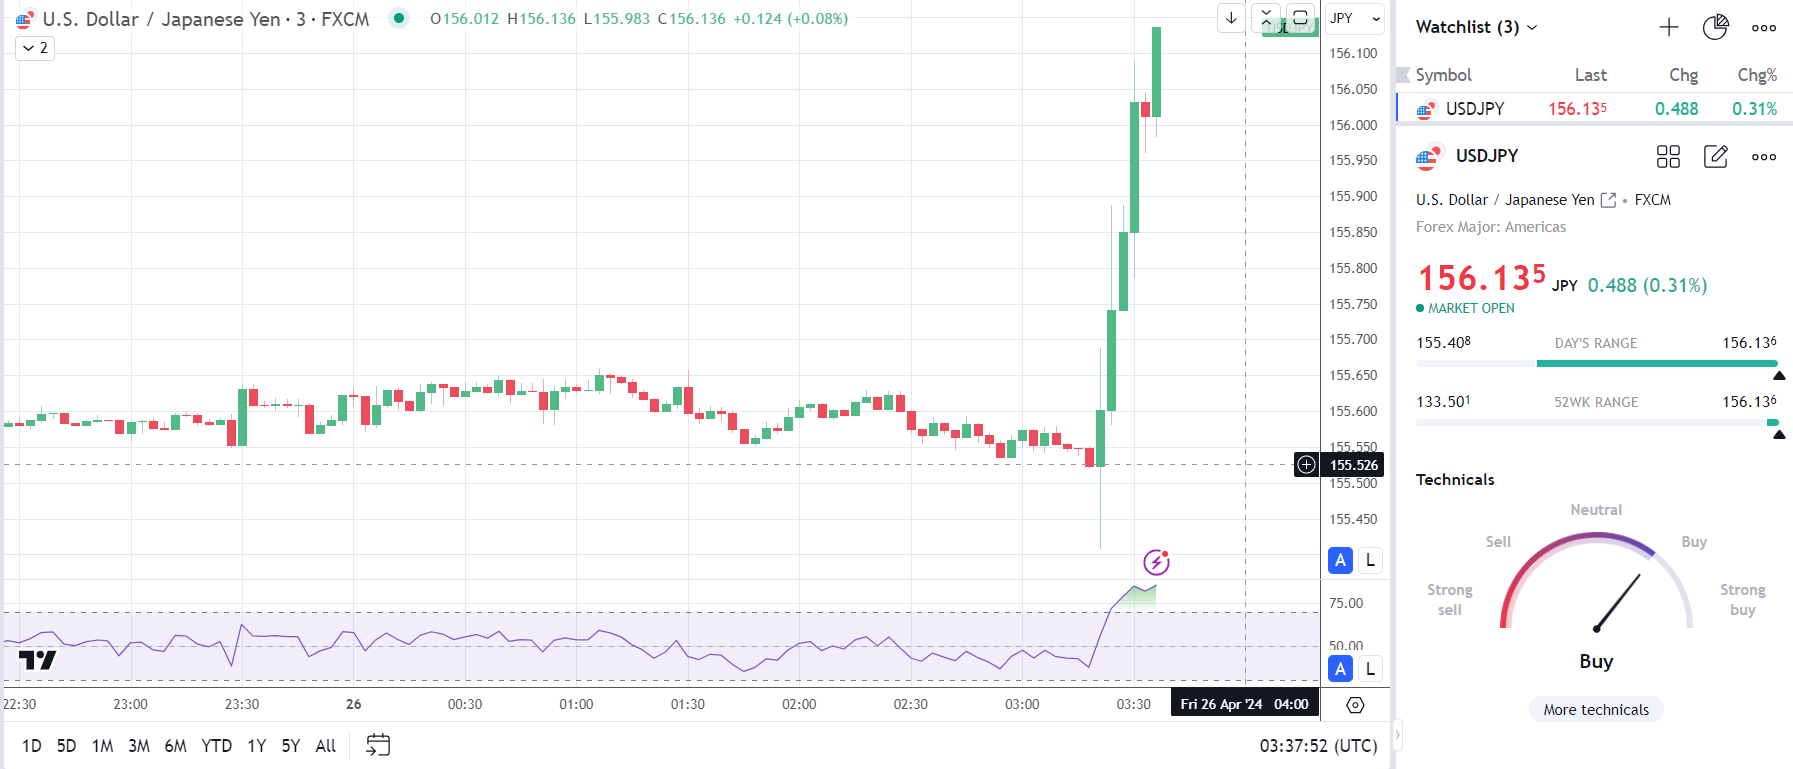 USD/JPY surges on BoJ policy decision.